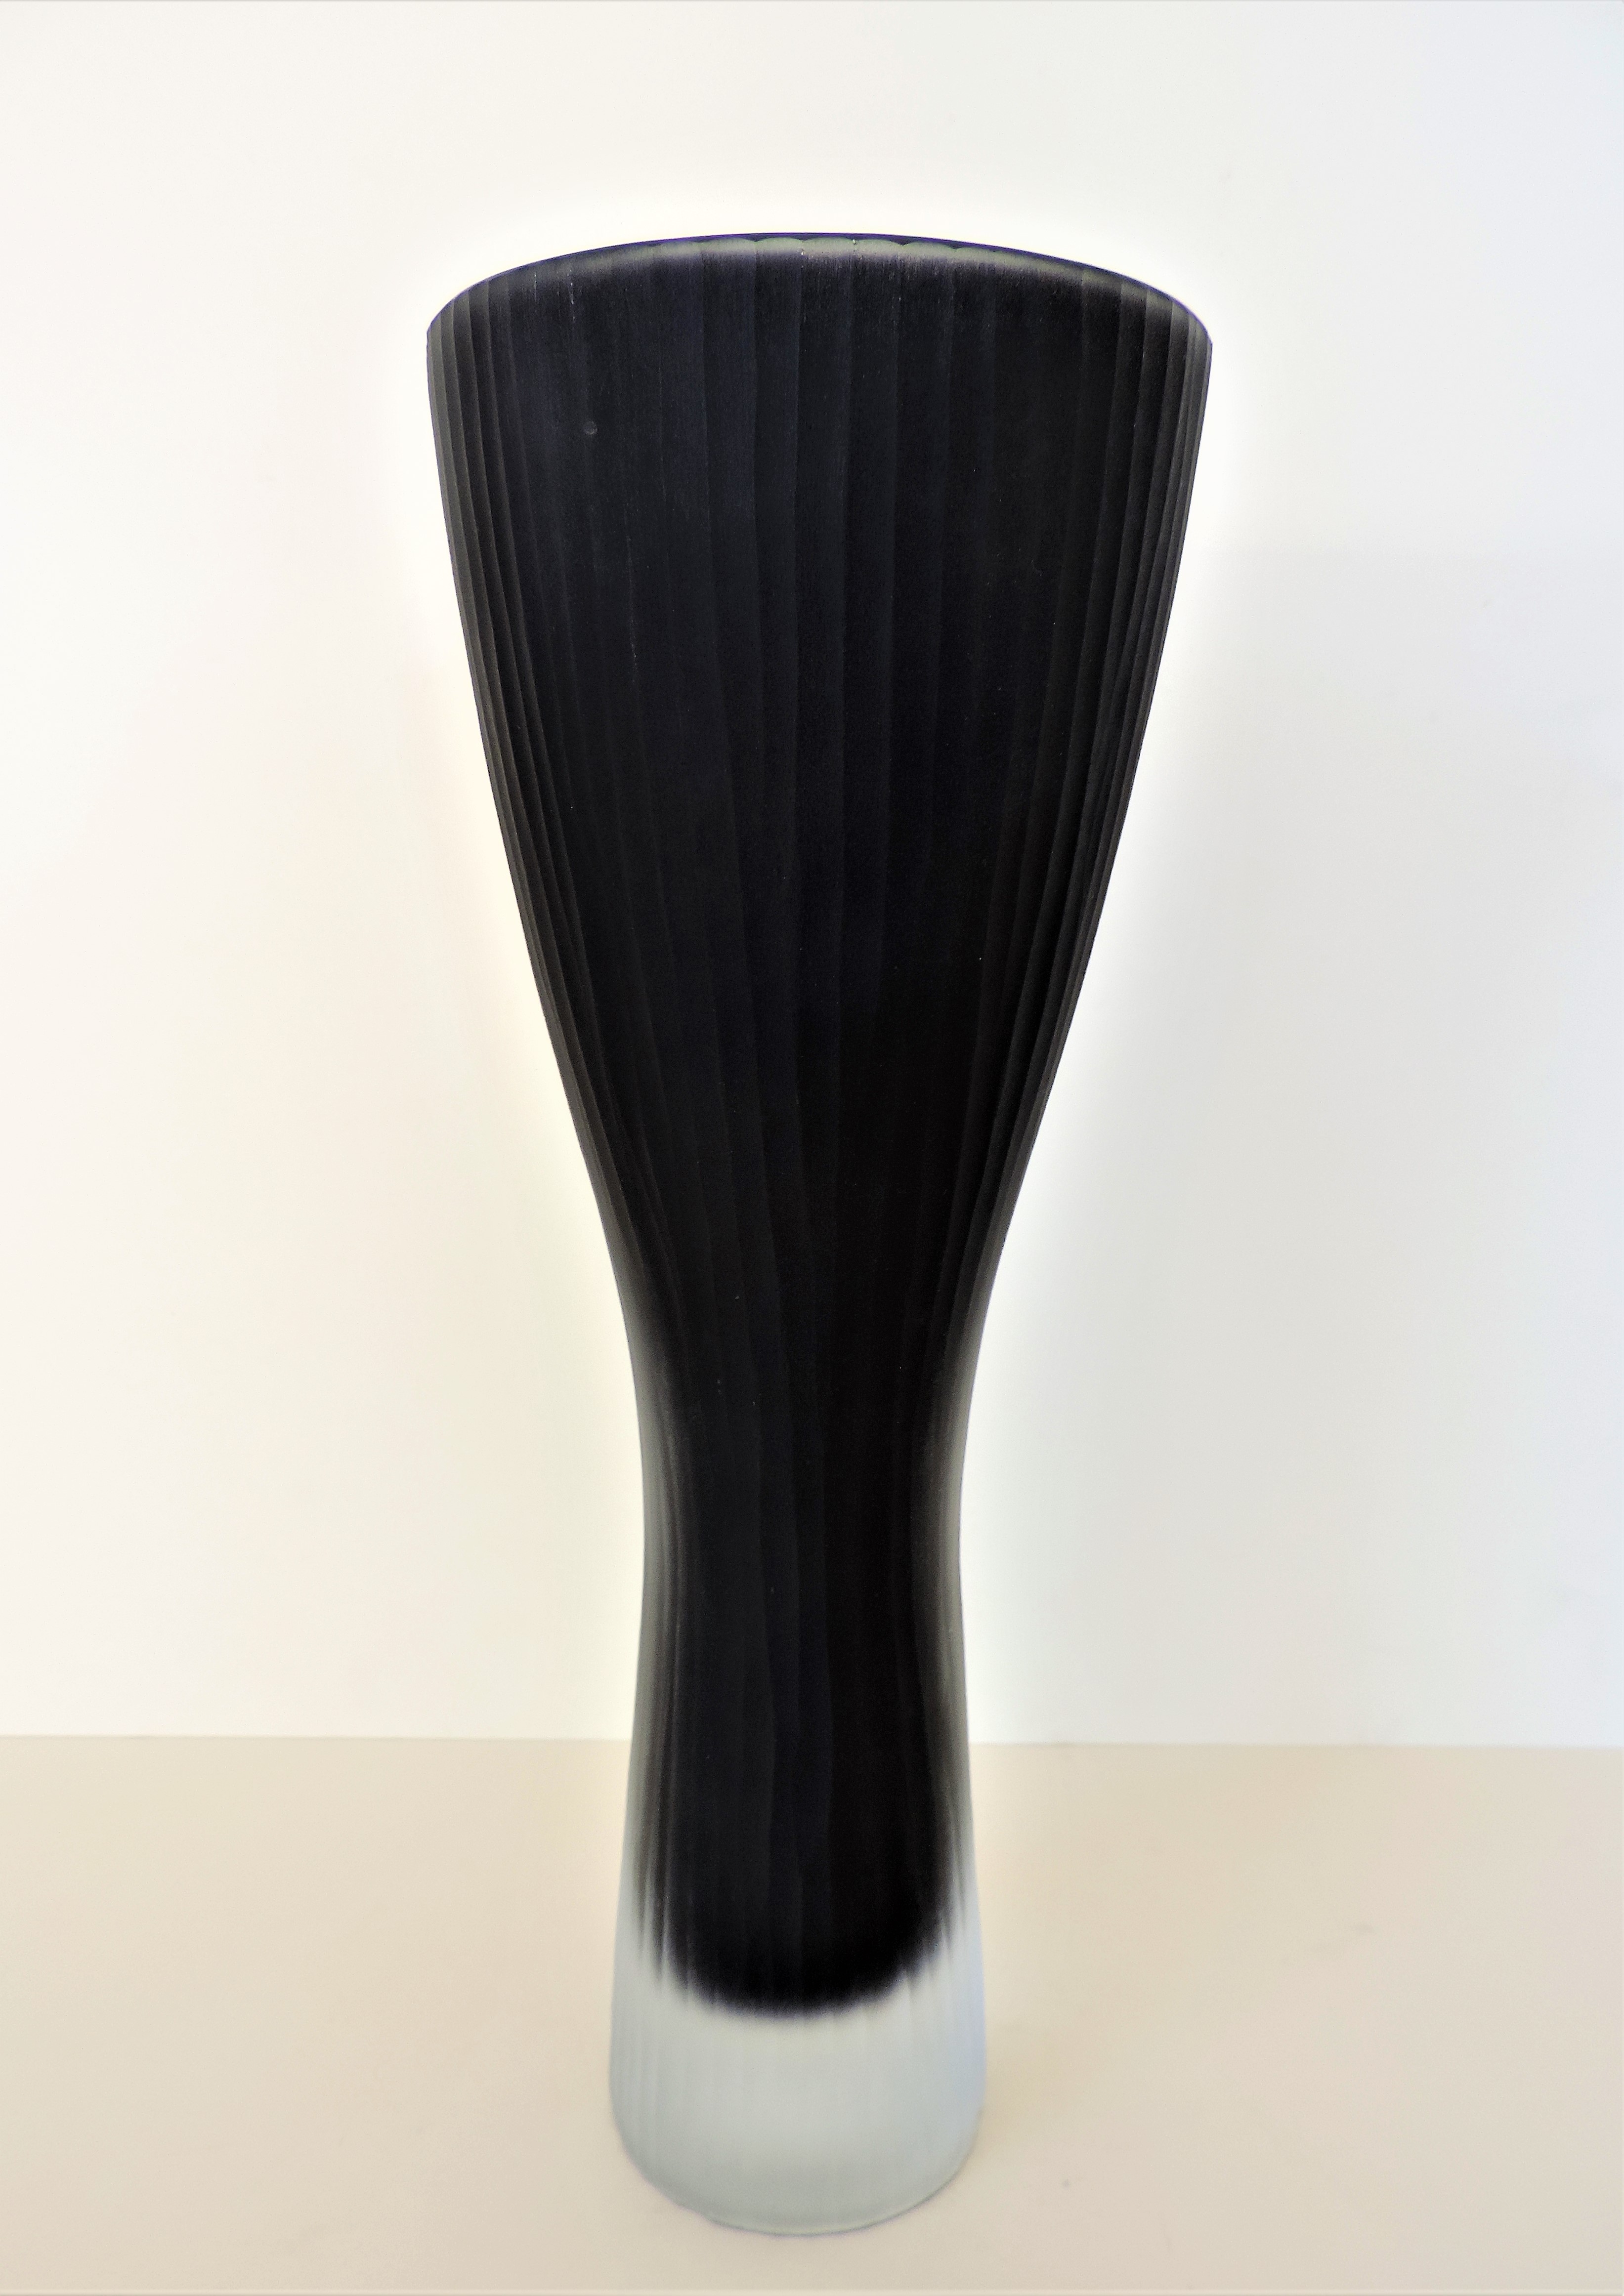 Textured Art Glass Black to Clear Vase 32cm High. - Image 5 of 6